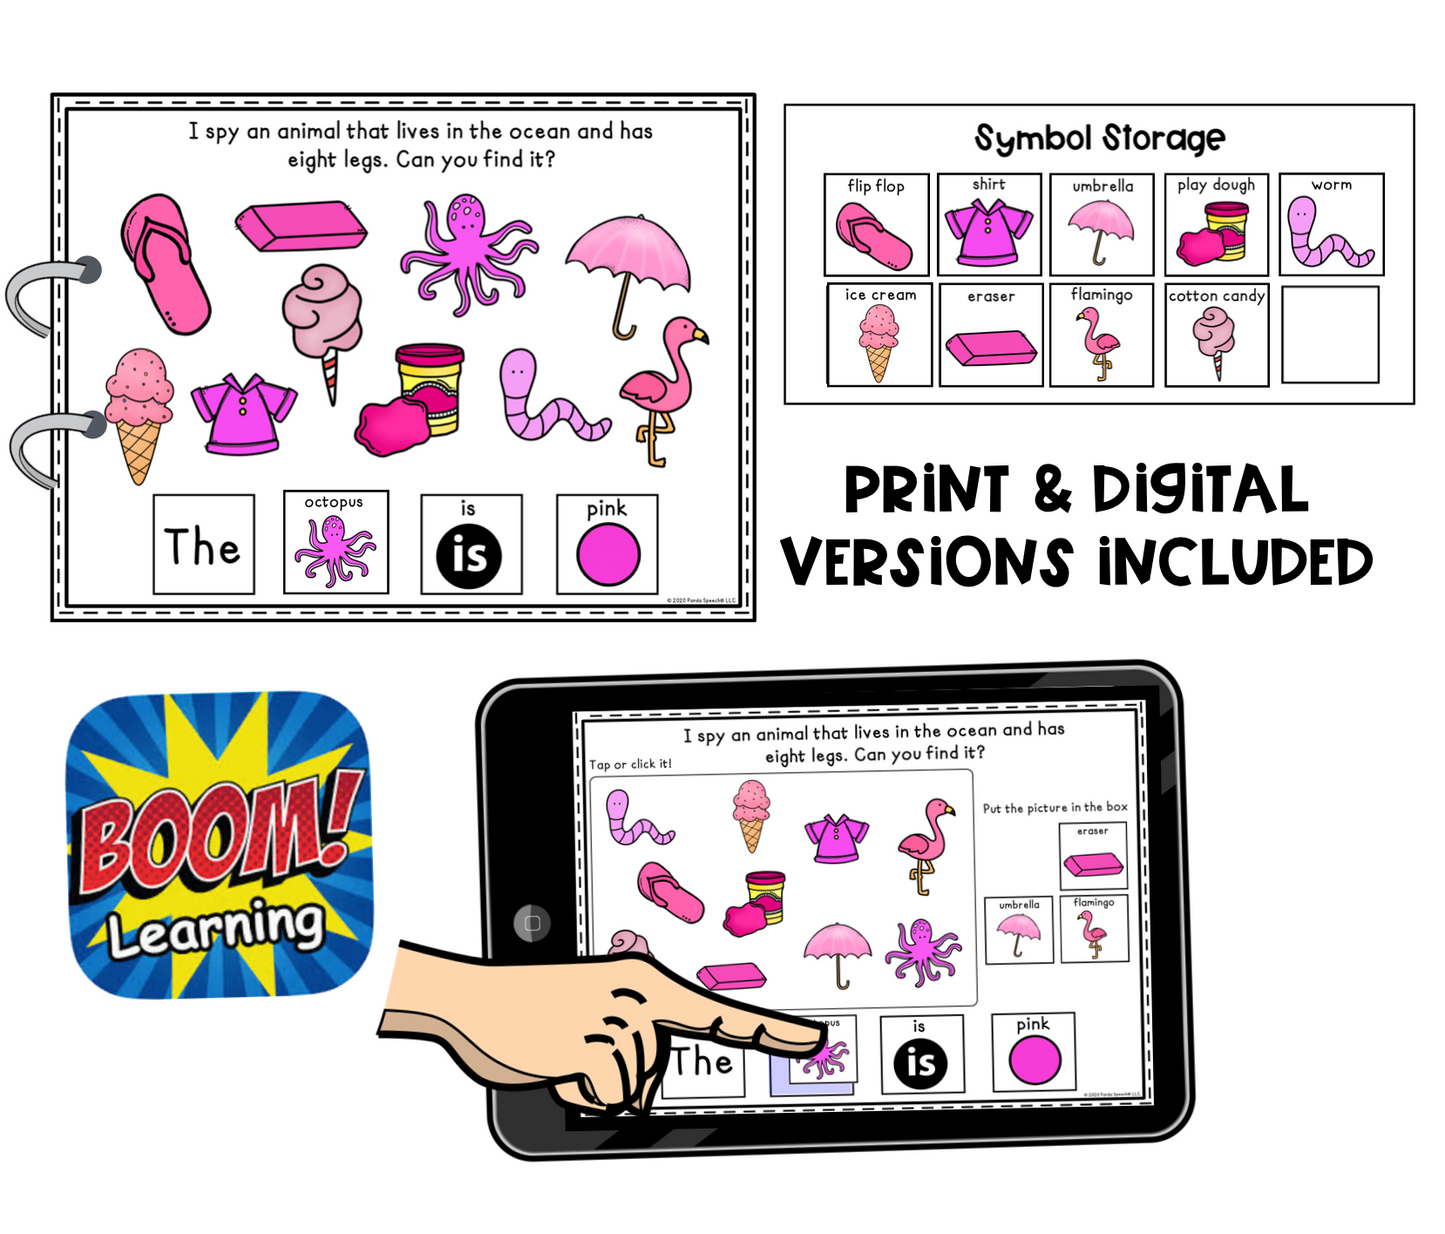 I Spy Pink Things! Color Series Print & Make Books (includes a digital BOOM Card book)